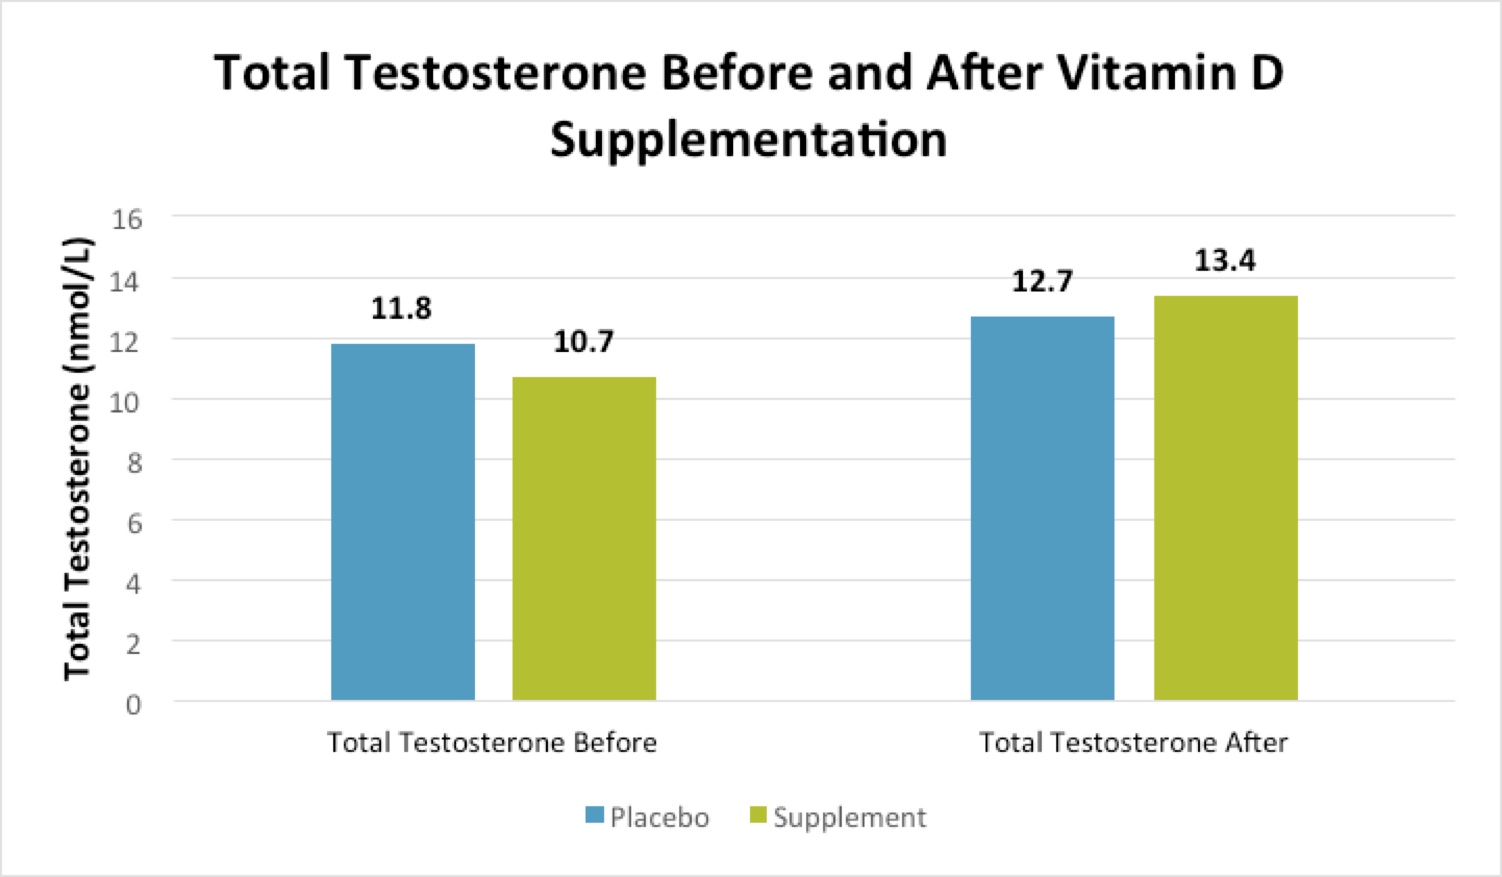 Does supplementation with vitamin D boost testosterone? 